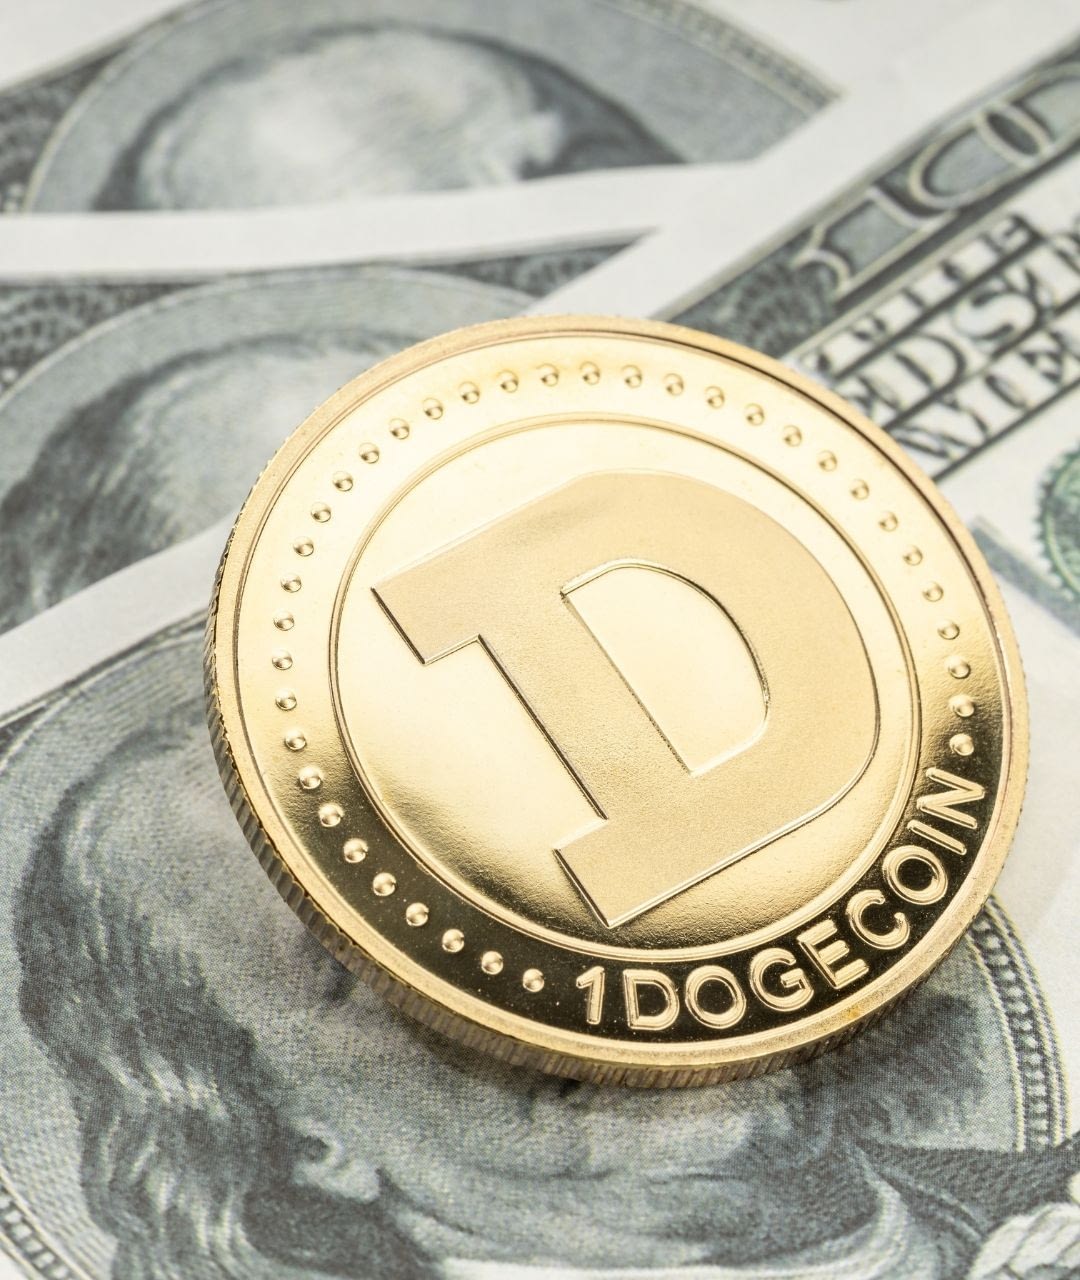 Charter your private jet with Dogecoin